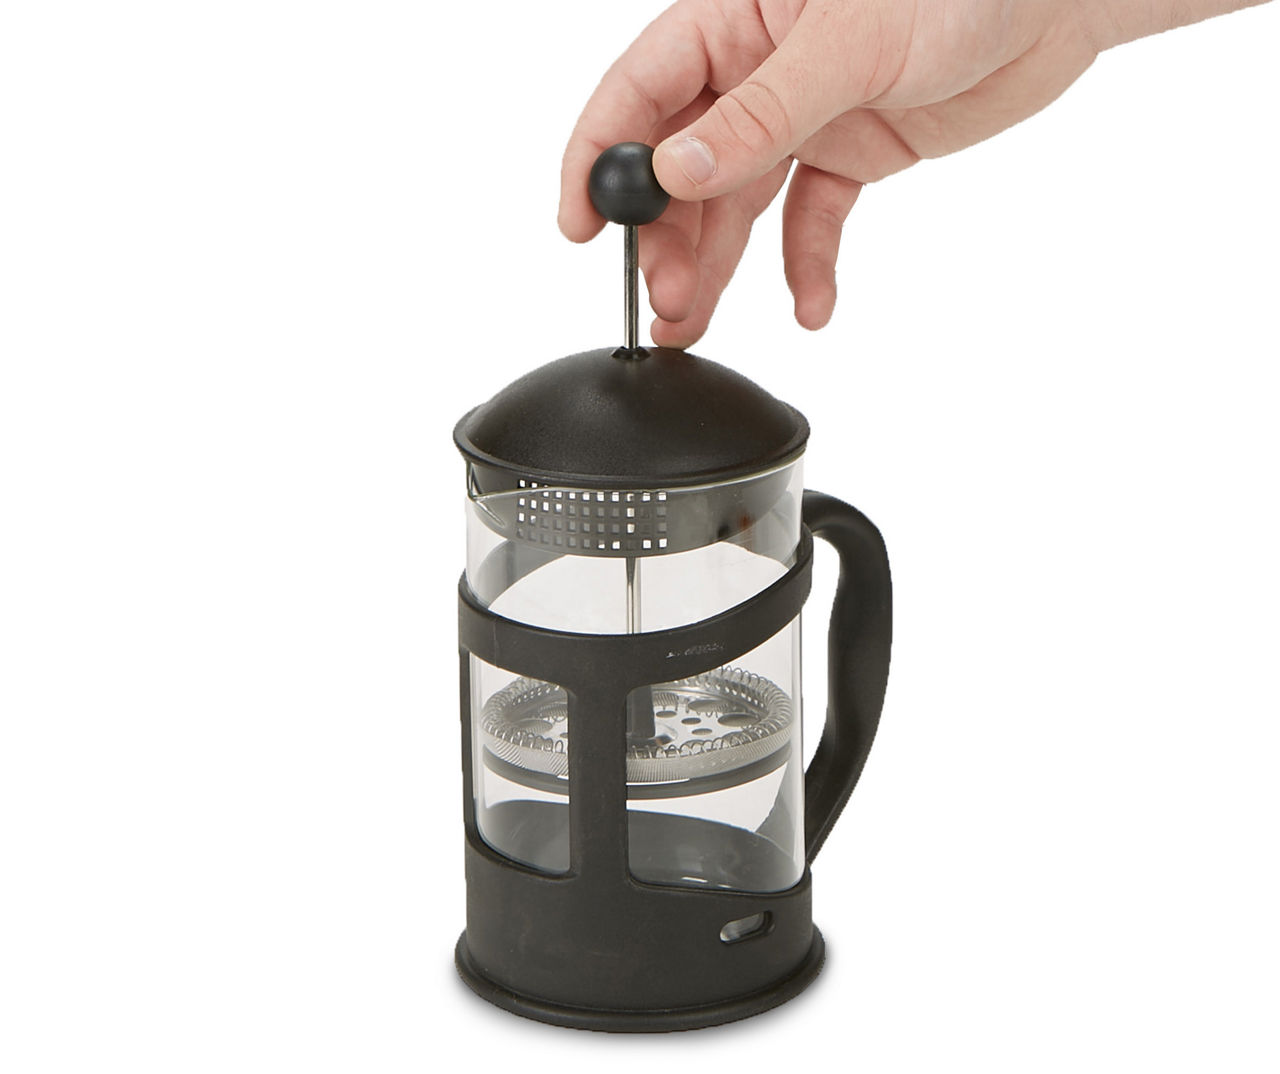 Shoppers Love This French Press, and It's on Sale